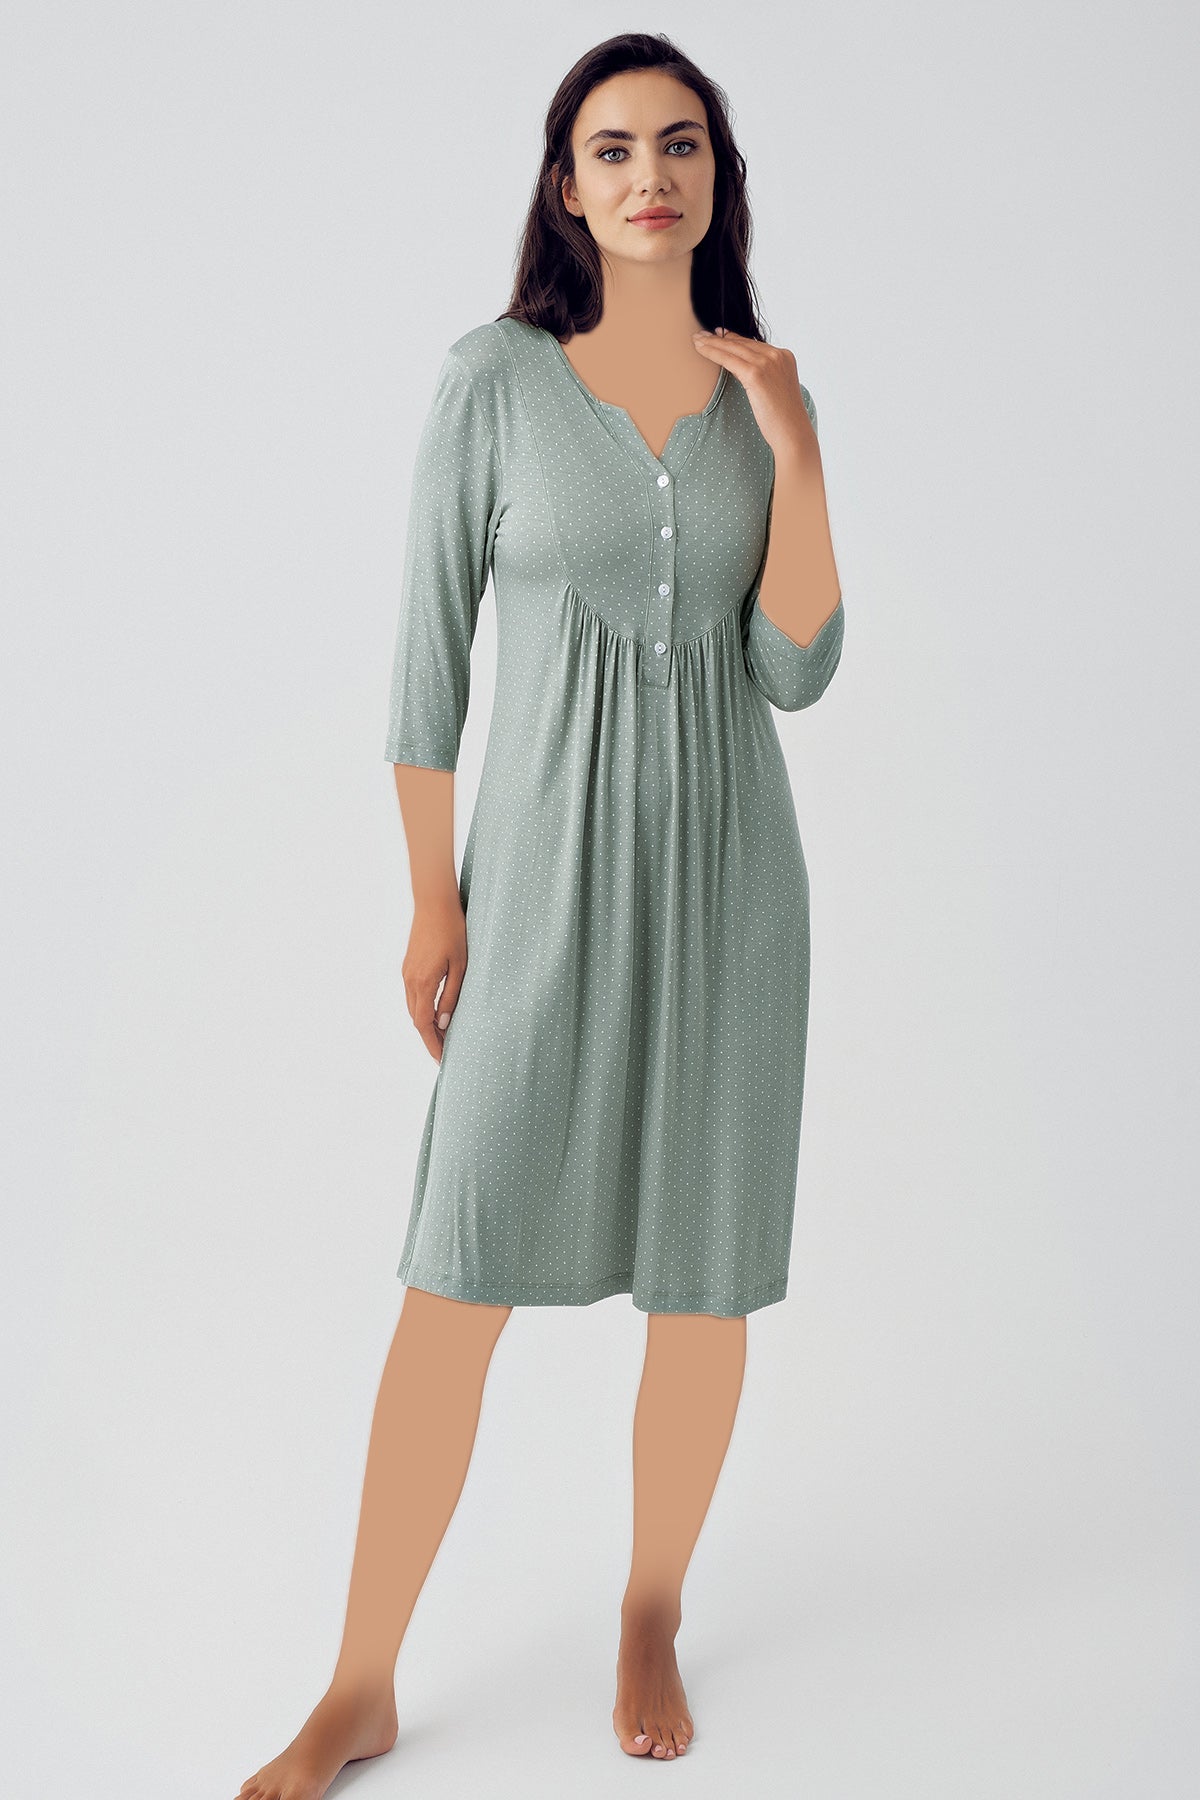 S&L Viscose Lycra Night Gown